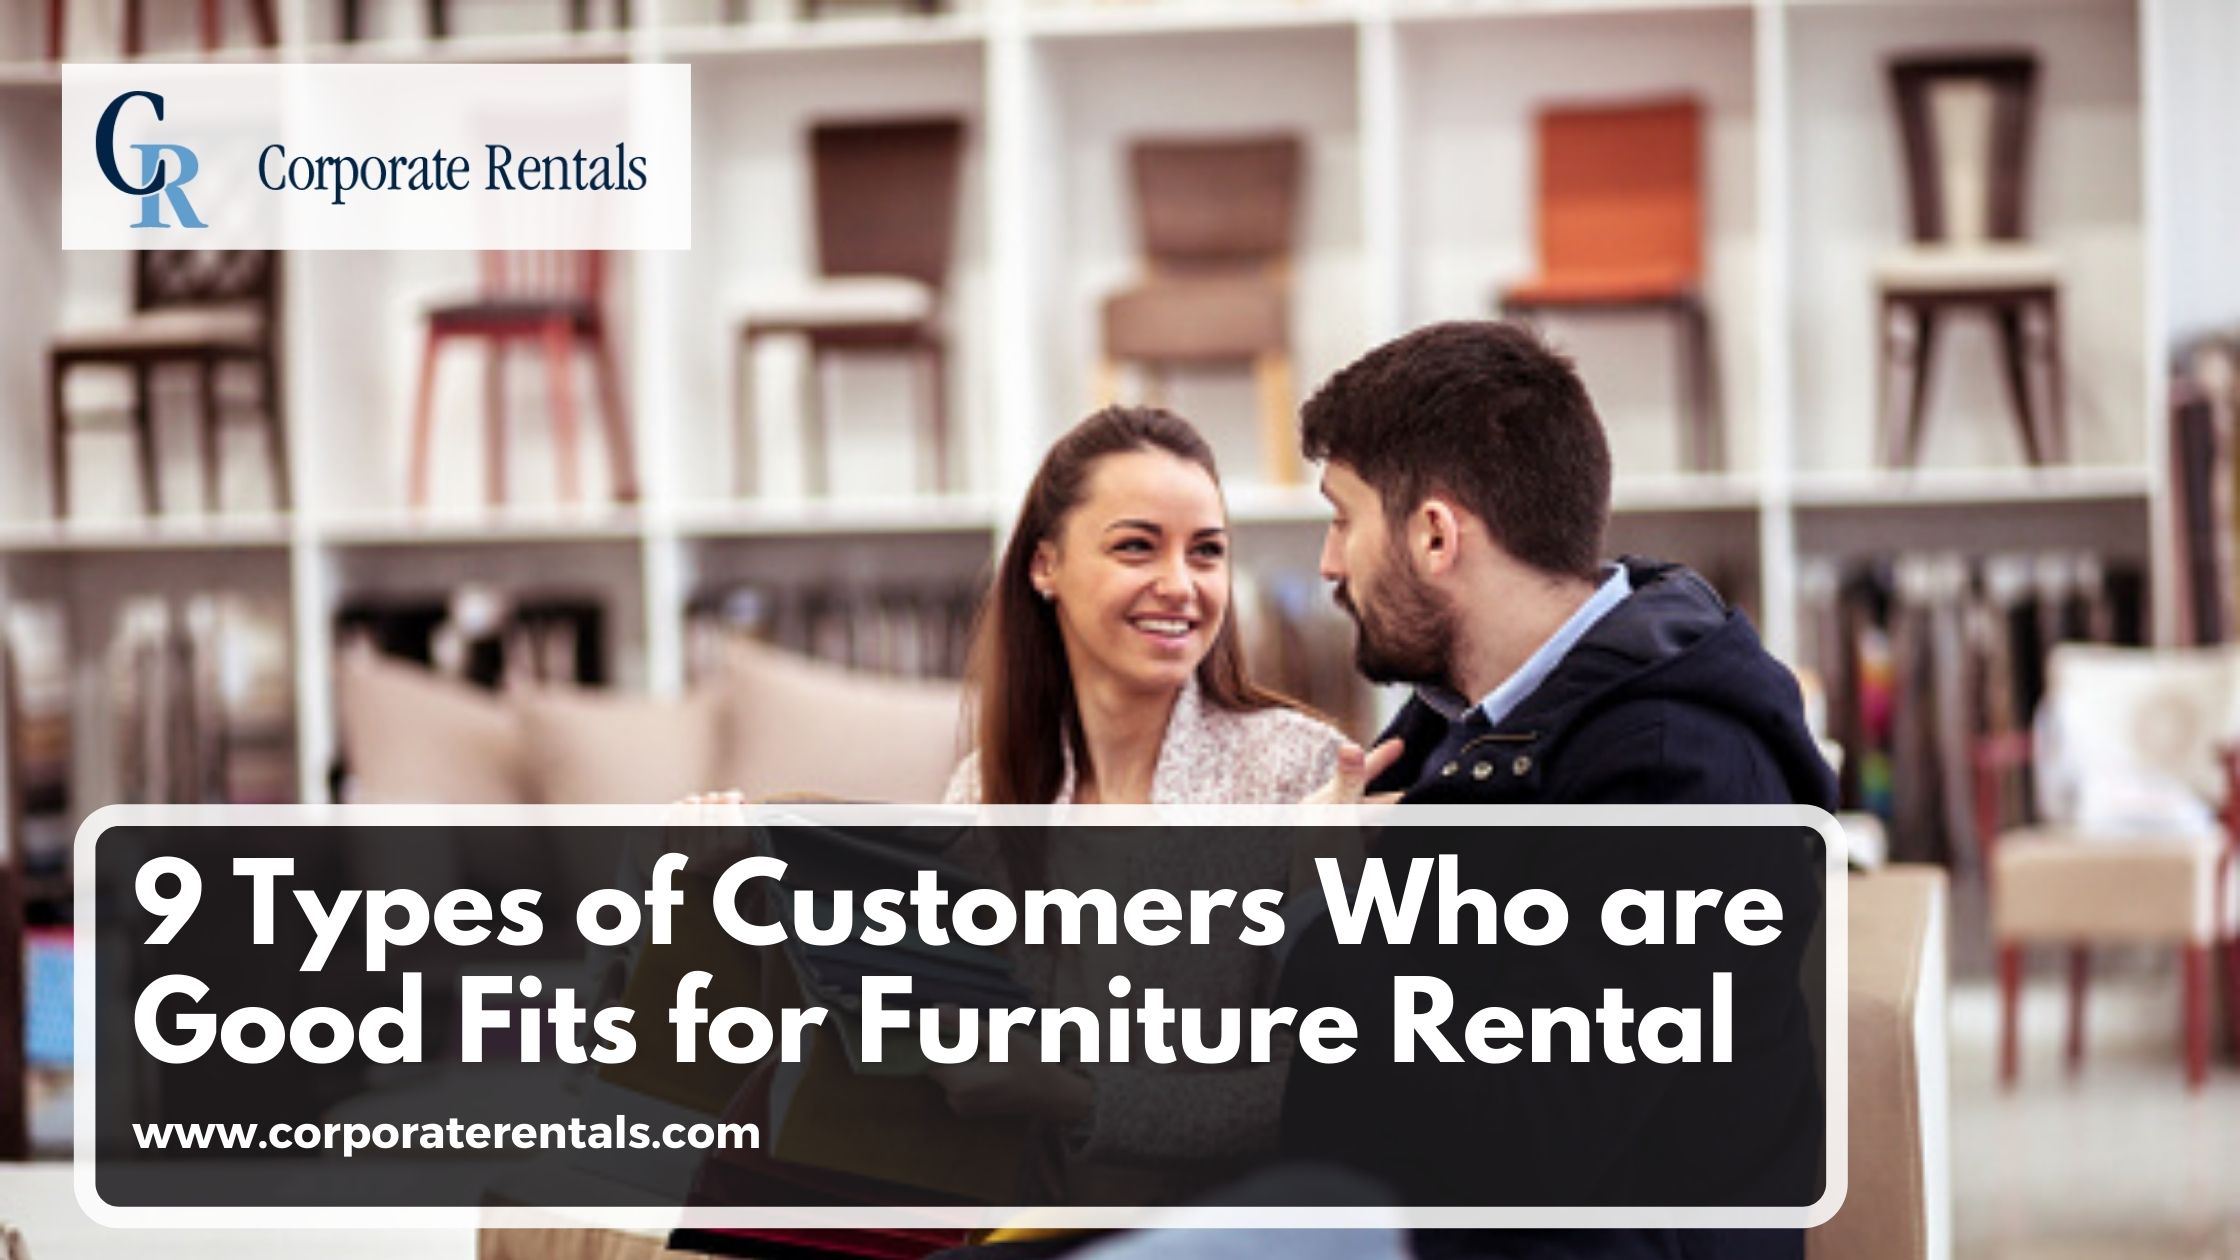 9 Types of Customers Who are Good Fits for Furniture Rental